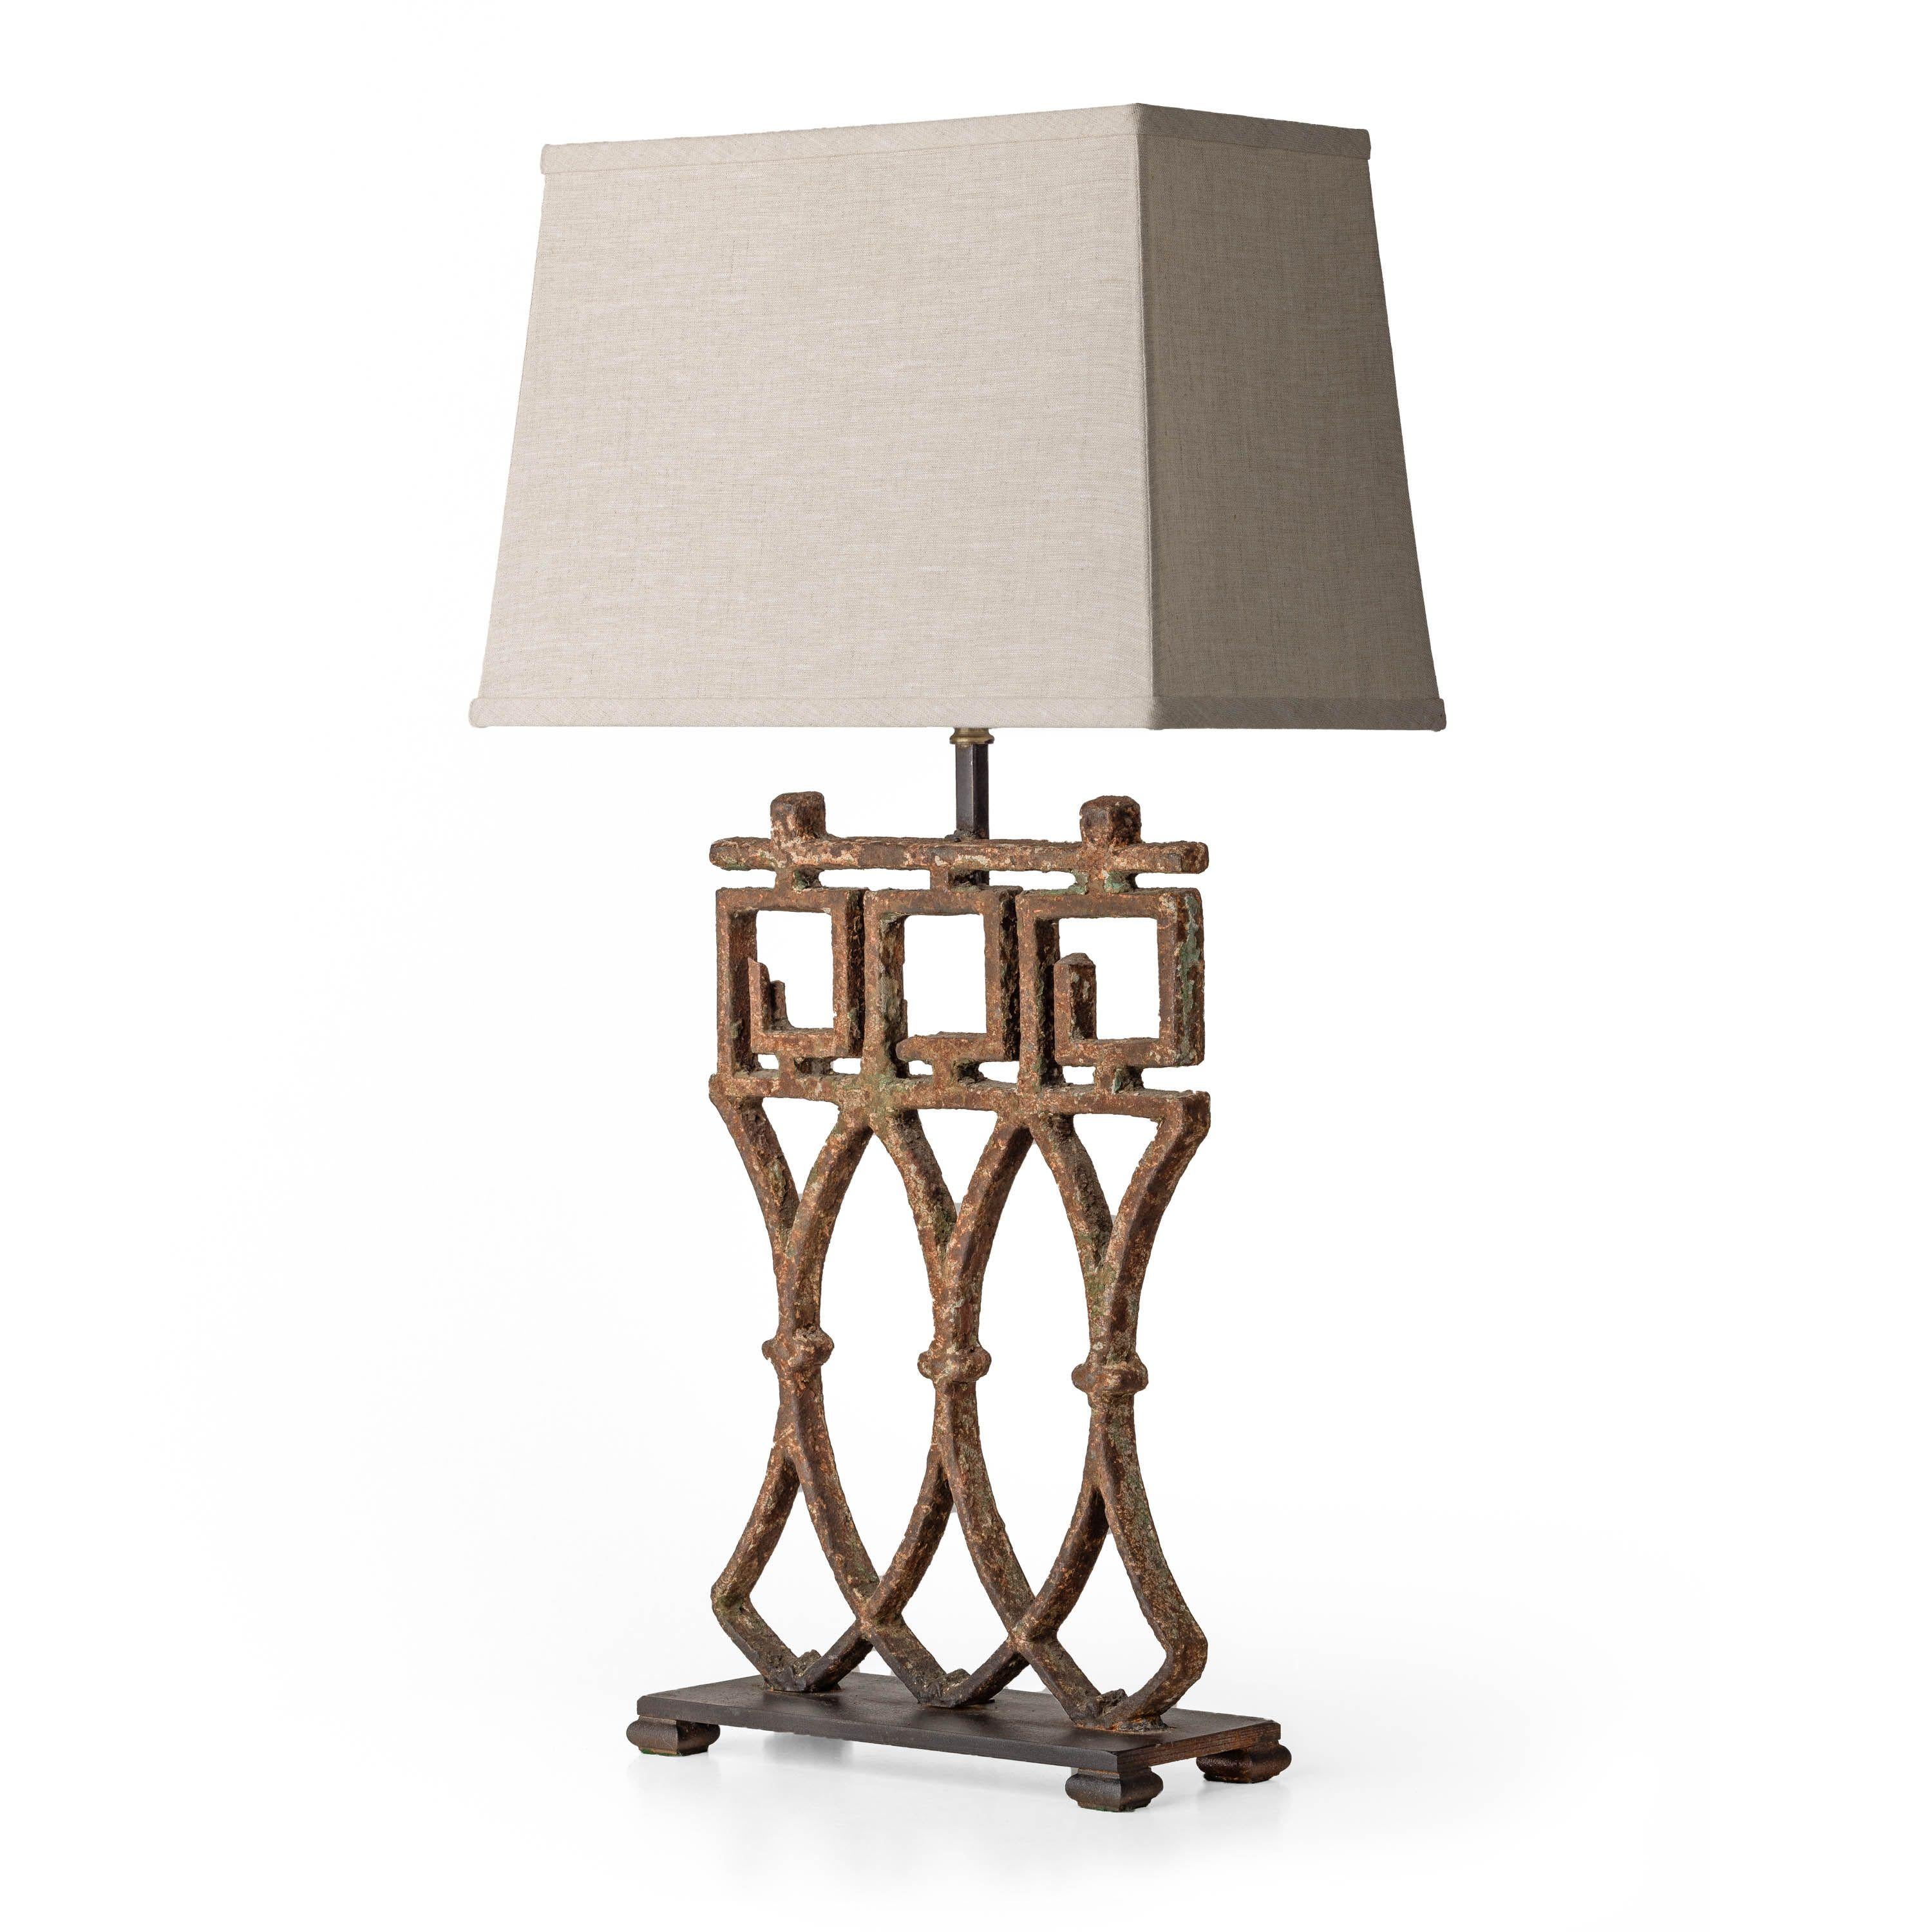 Antique iron gate pieces with original patina paint and aging iron made into table lamps. Greek Key design lends an air of classicism to this substantial pair of lamps, topped by natural linen shades. Narrow depth makes them perfect for a fireplace